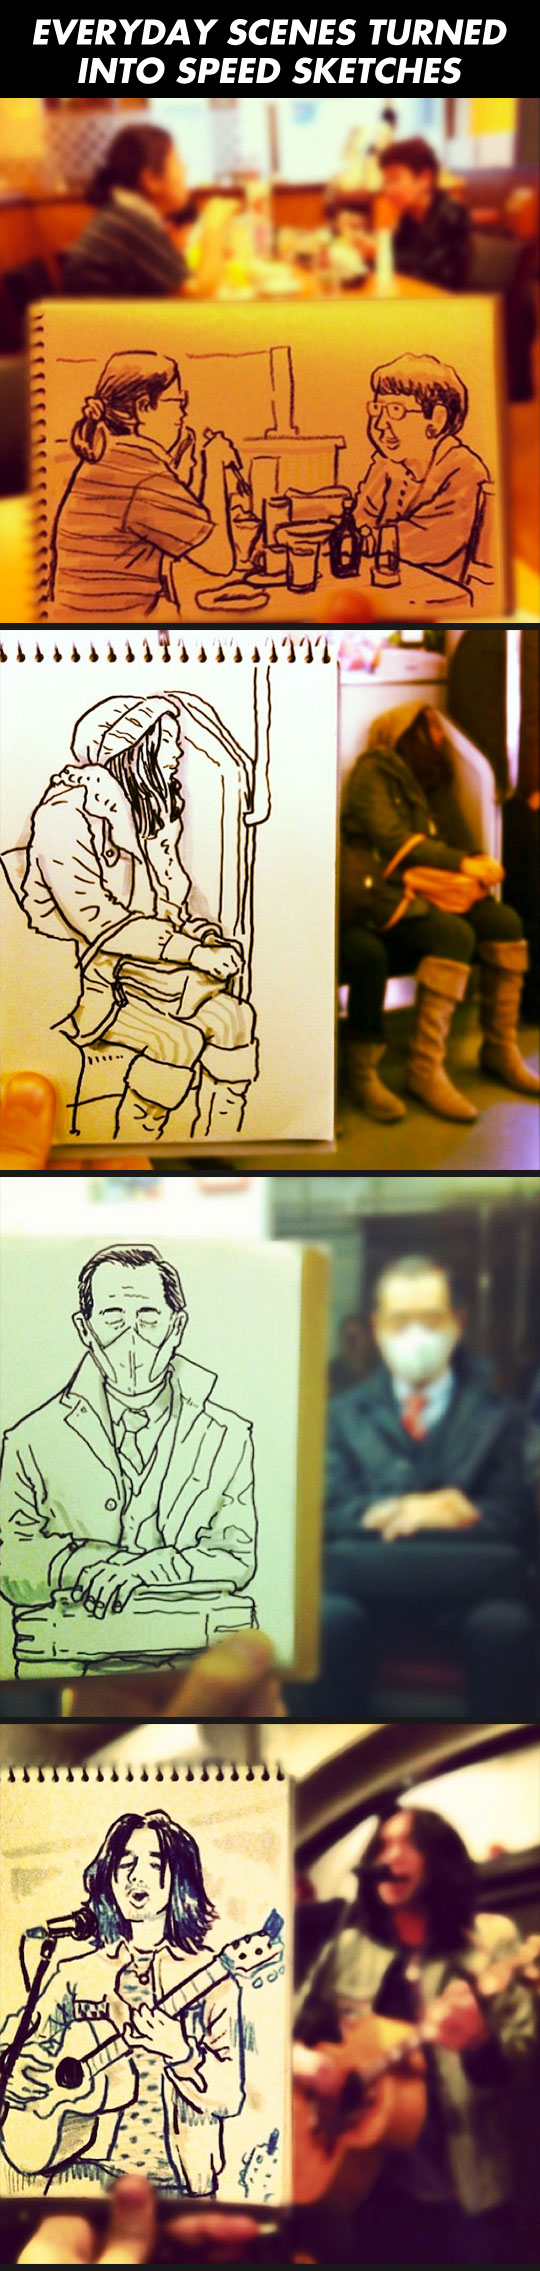 Great Artist Turns Everyday Scenes Into Sketches